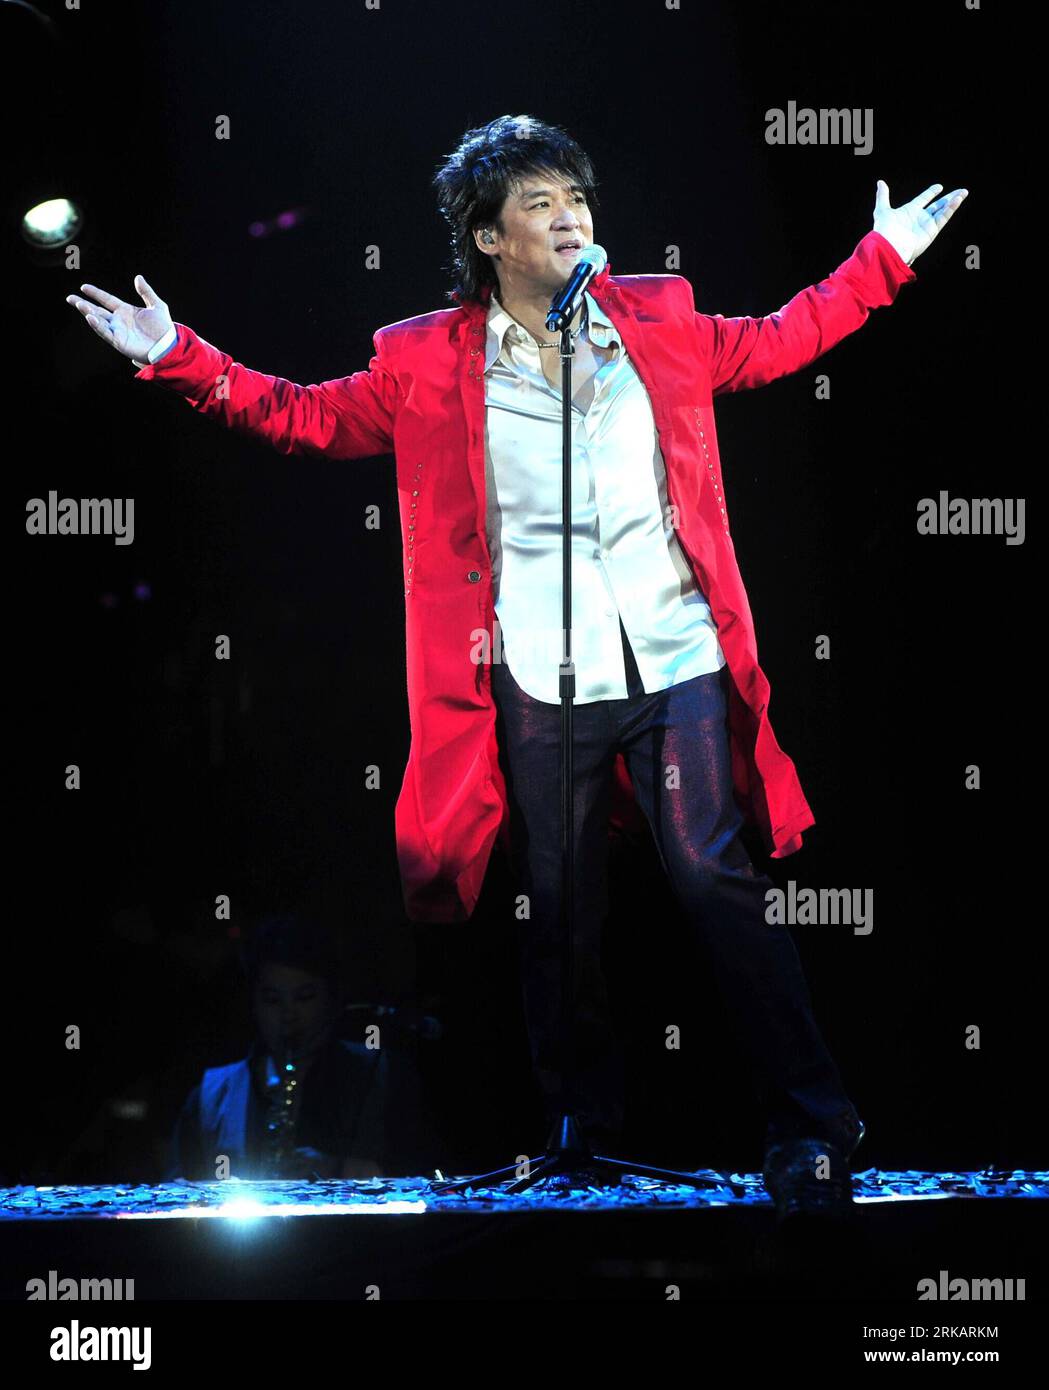 Bildnummer: 54420299  Datum: 11.09.2010  Copyright: imago/Xinhua (100912) -- WUHAN, Sept. 12, 2010 (Xinhua) -- Singer Emil Chau performs during the Wuhan stage of his 2010 tour concert in the gymnasium of the sports center in Wuhan, capital of central China s Hubei Province, Sept. 11, 2010. (Xinhua/Xiong Bo) (mcg) CHINA-WUHAN-EMIL CHAU-CONCERT (CN) PUBLICATIONxNOTxINxCHN People Entertainment Kultur Musik Aktion kbdig xdp 2010 hoch    Bildnummer 54420299 Date 11 09 2010 Copyright Imago XINHUA  Wuhan Sept 12 2010 XINHUA Singer Emil Chau performs during The Wuhan Stage of His 2010 Tour Concert in Stock Photo